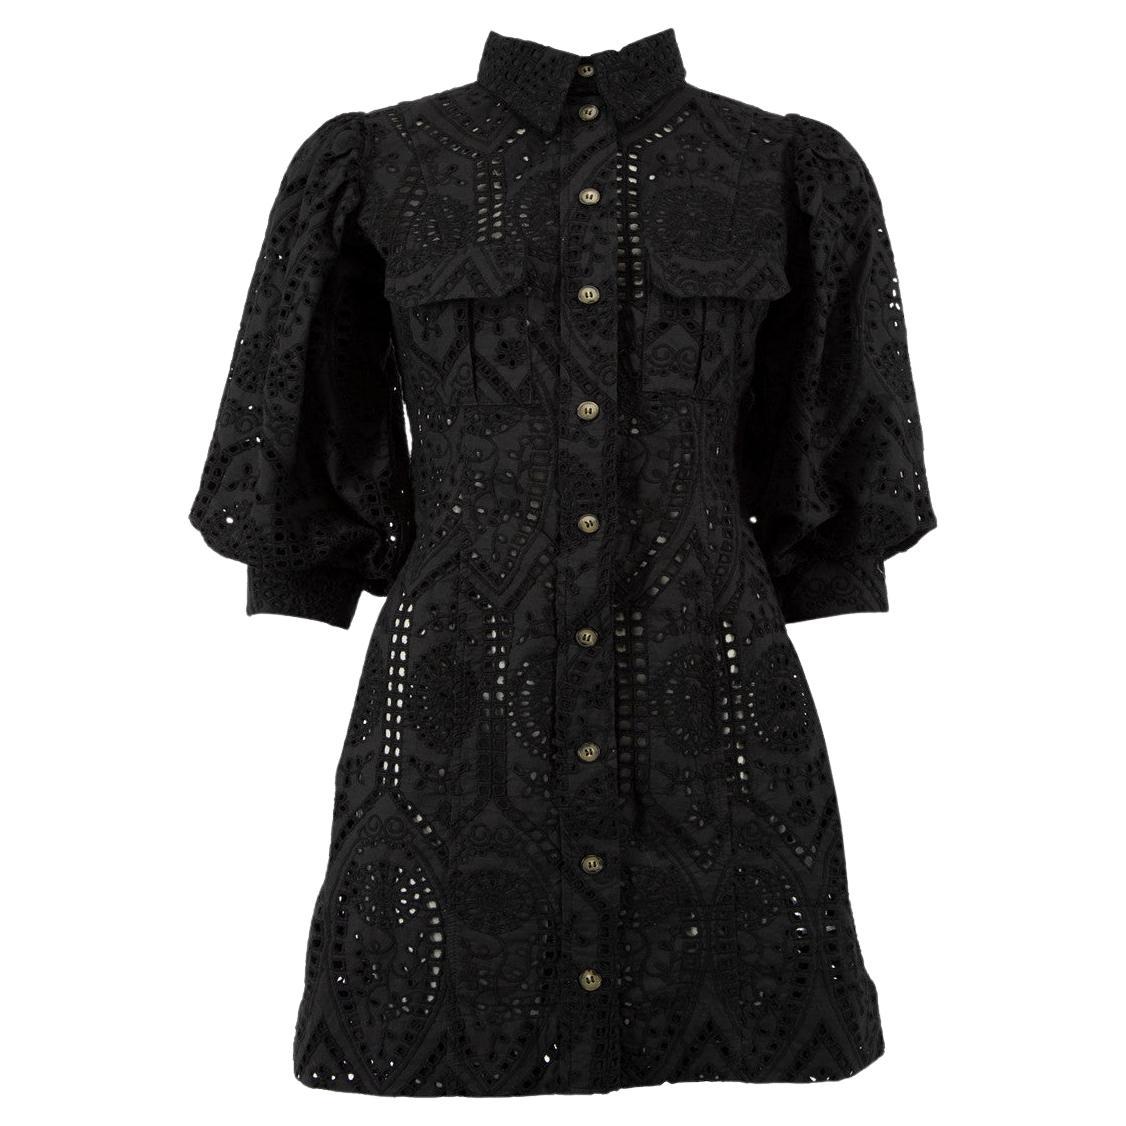 Pre-Loved Ganni Women's Black Perforated Embroidered Shirt Dress